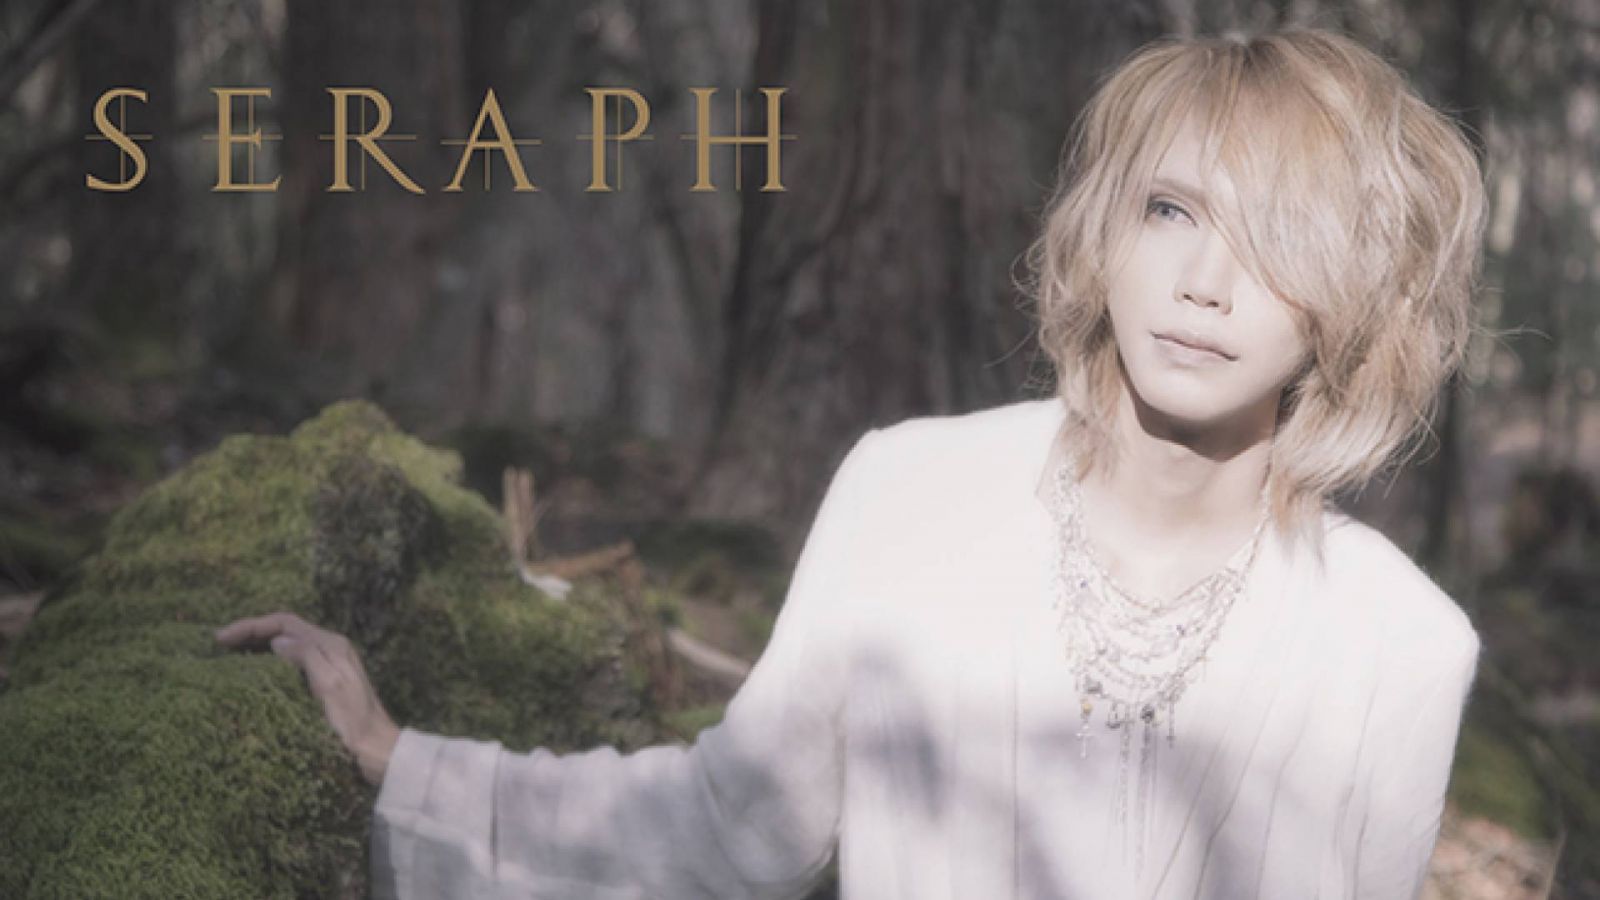 SERAPH hará un debut a nivel mundial en NICONICO © SERAPH. All Rights Reserved.